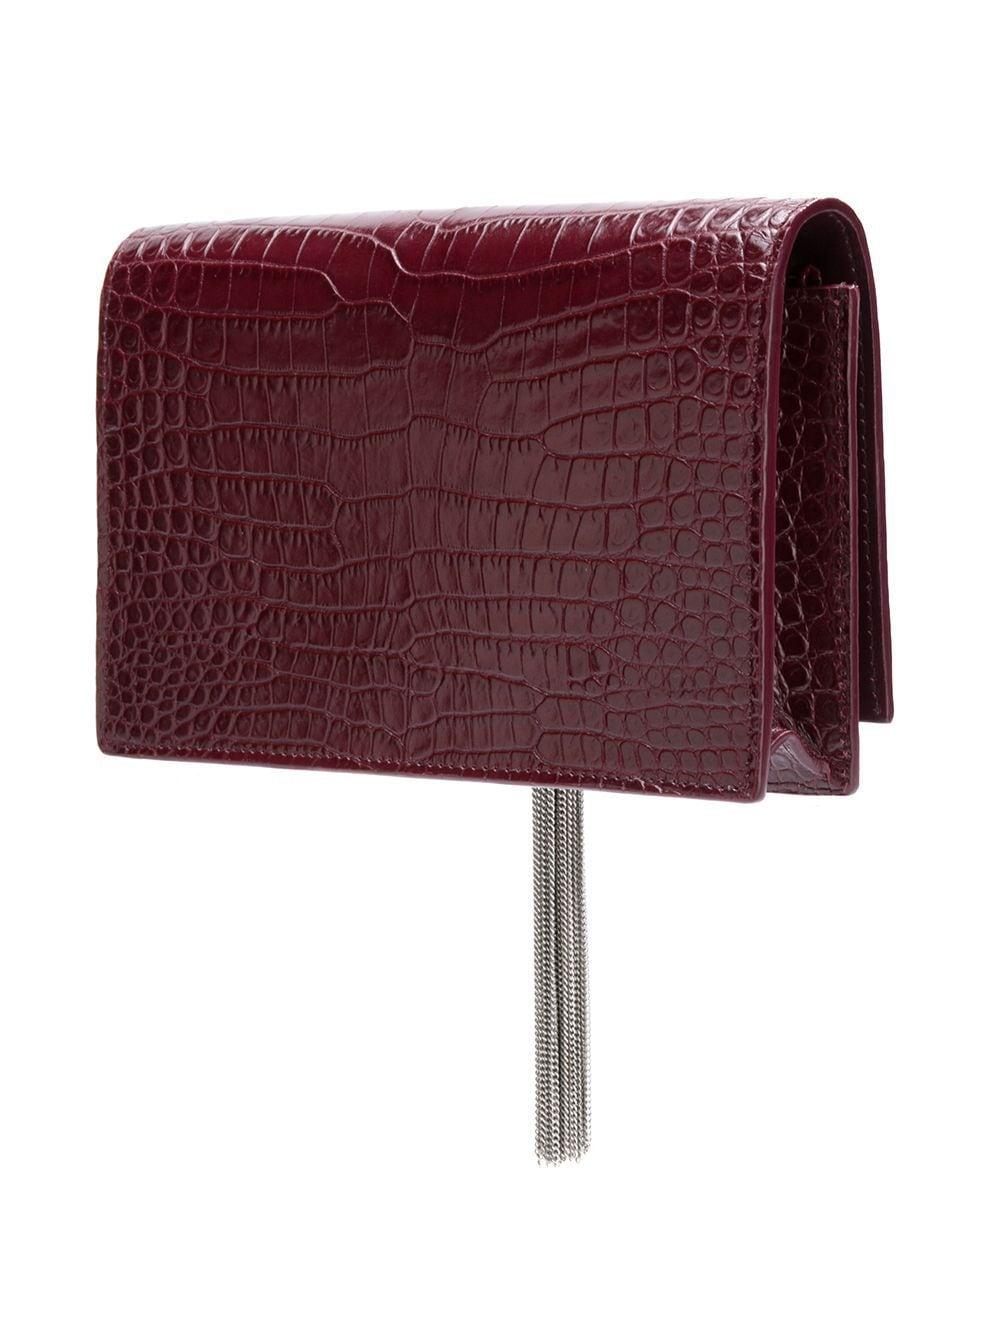 This classic Saint Laurent shoulder bag is made with burgundy red croc embossed calf leather with a long gourmette (a jewellery chain) strap in sliver tone. The bag features sliver tone hardware, a front foldover flap, a signature YSL monogram logo